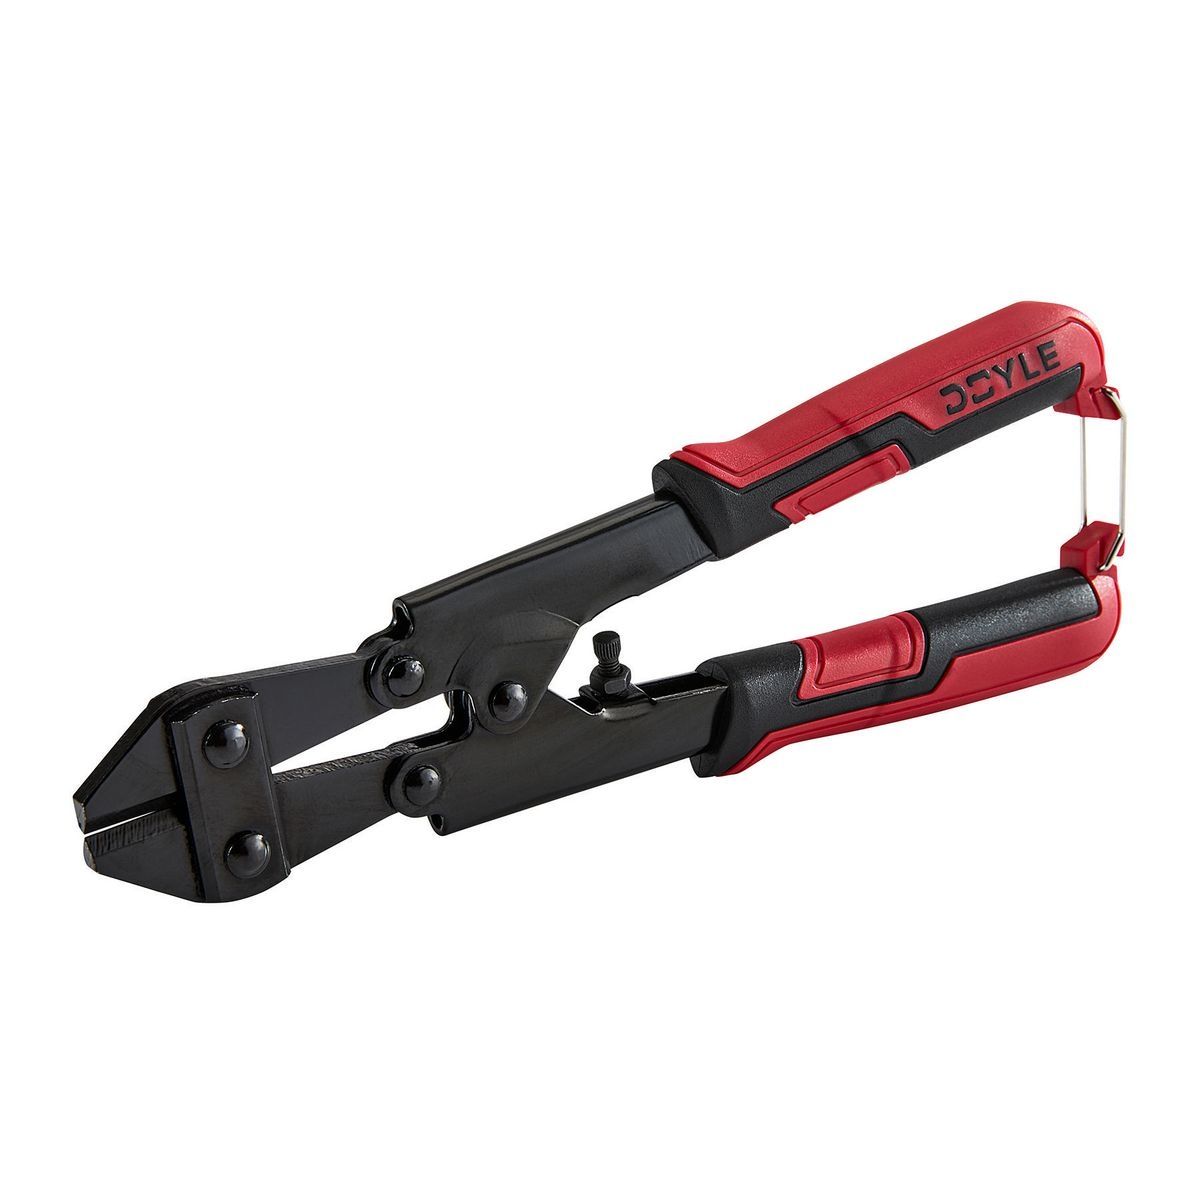 DOYLE 8 In. Bolt and Wire Cutter